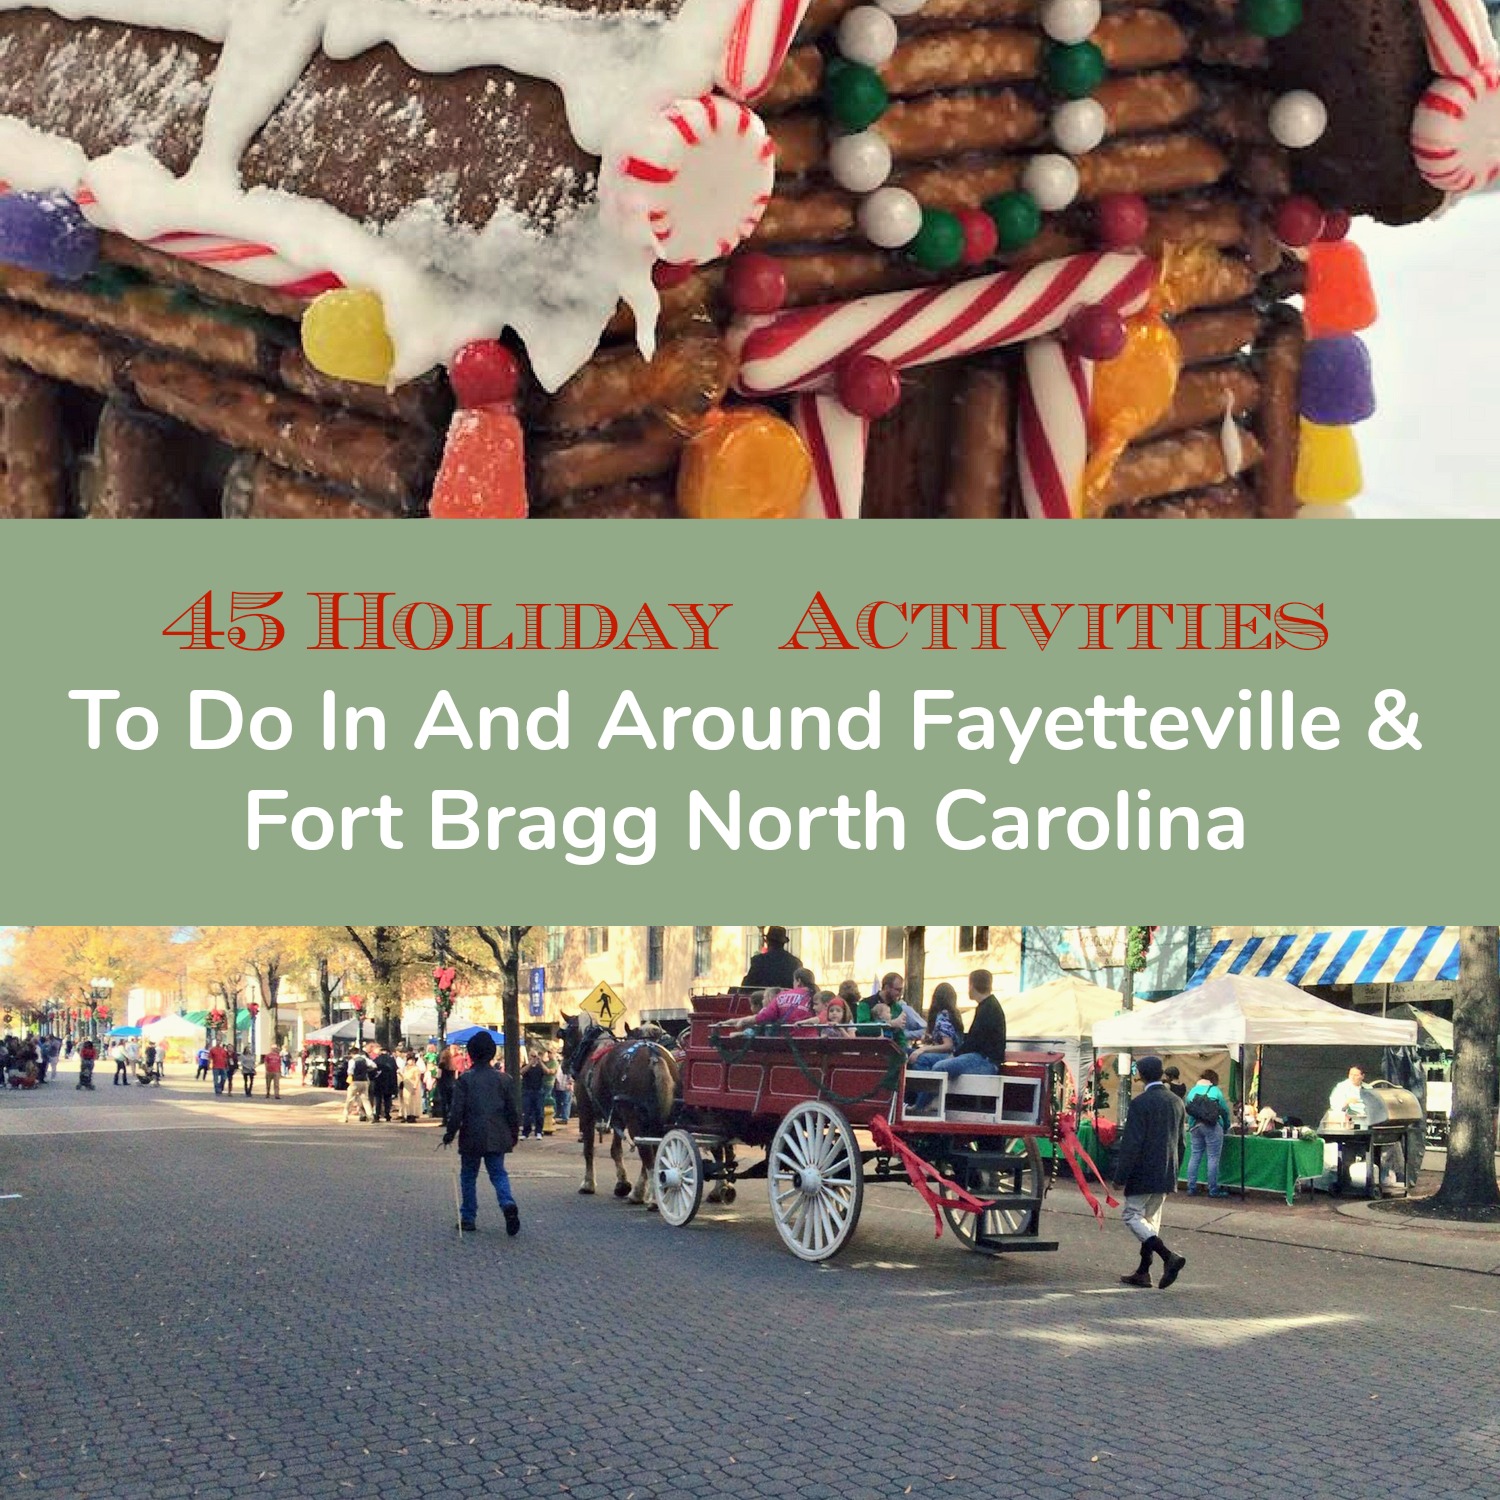 45 Holiday Activities To Do In And Around Fayetteville & Fort Bragg